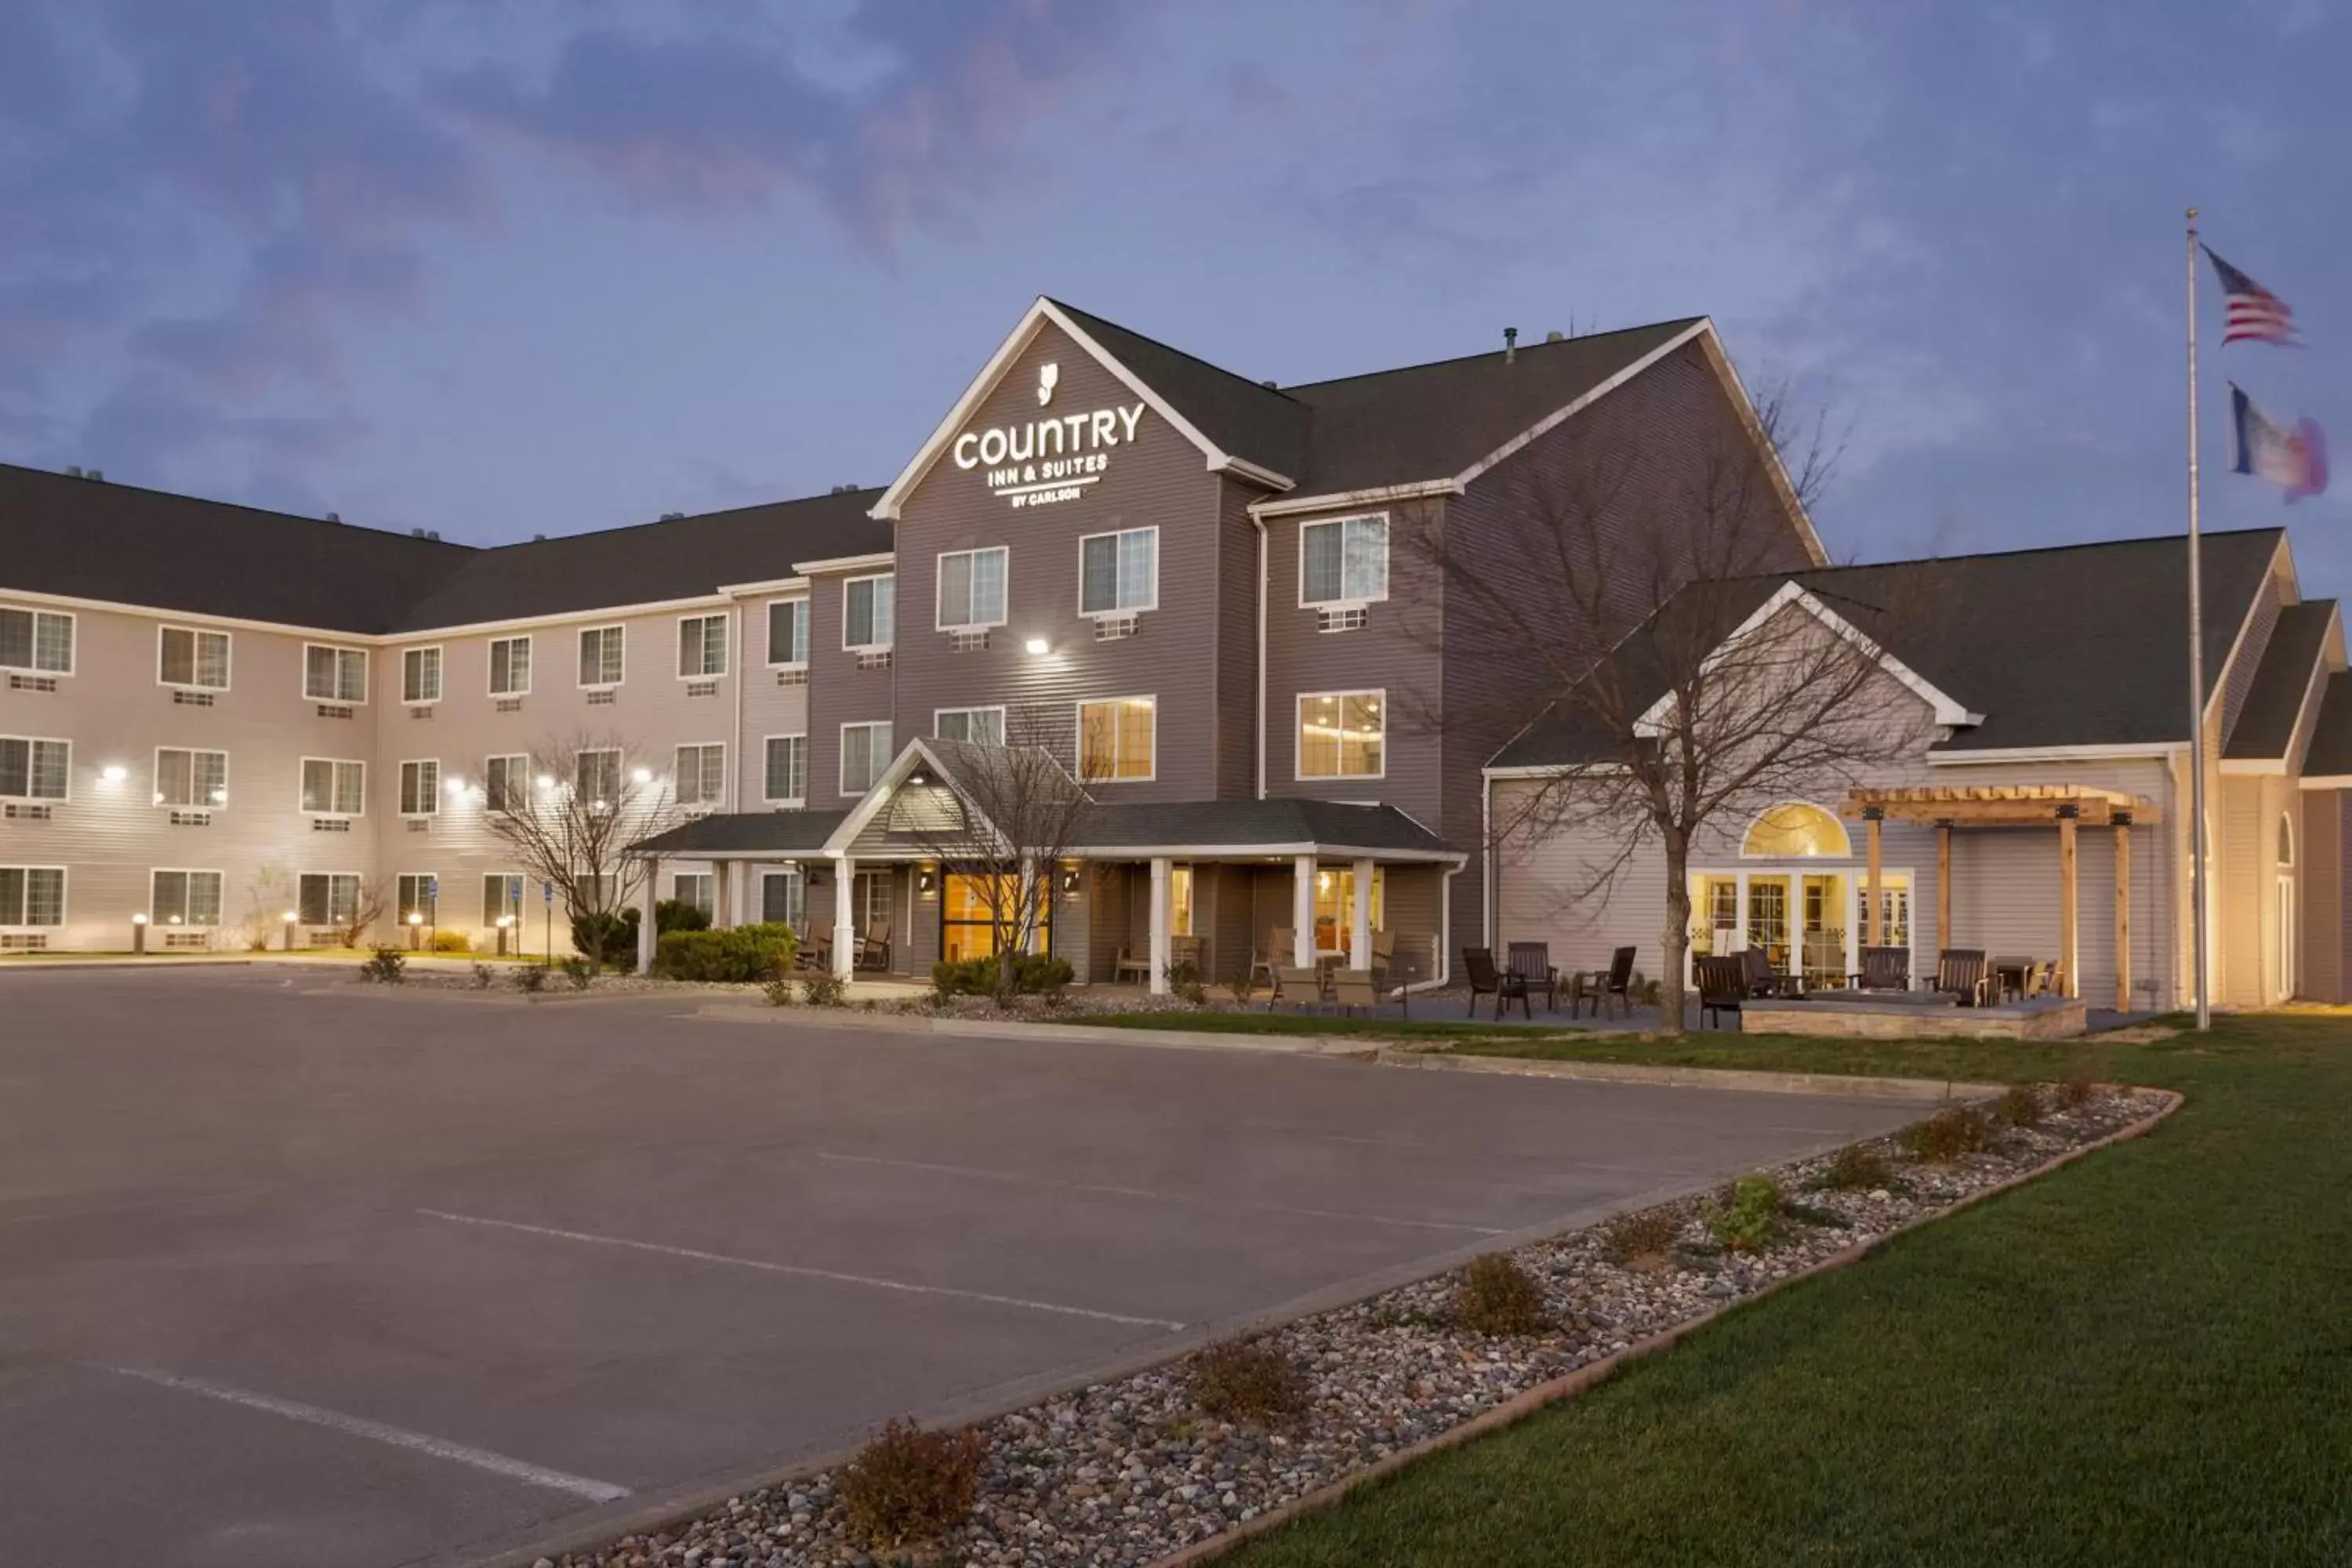 Property Building in Country Inn & Suites by Radisson, Ames, IA